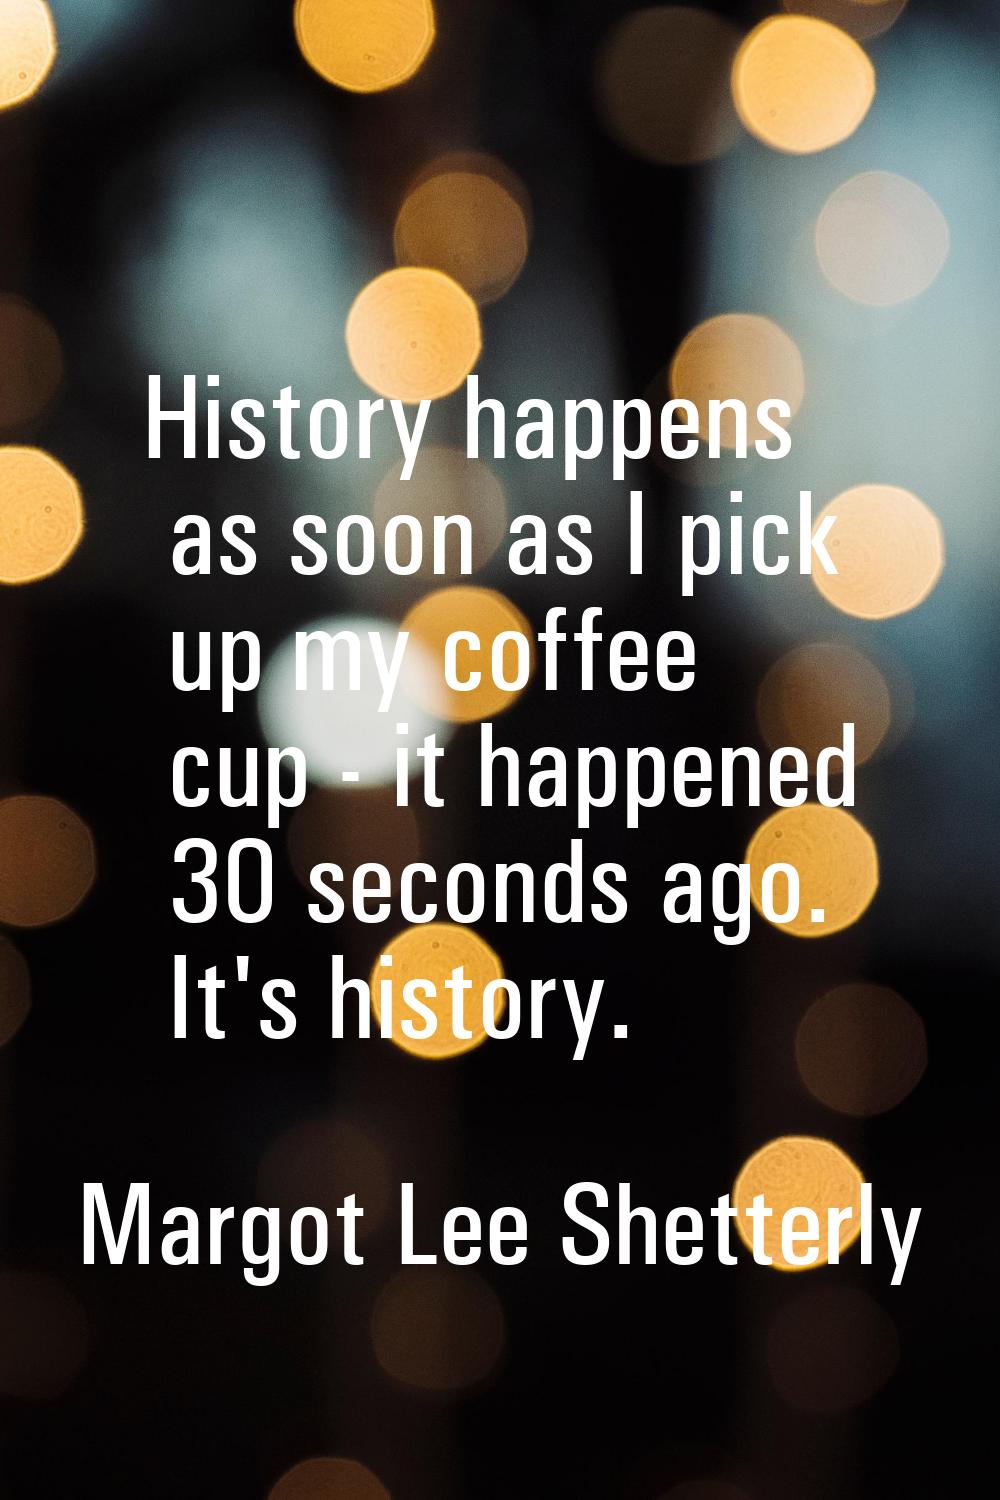 History happens as soon as I pick up my coffee cup - it happened 30 seconds ago. It's history.